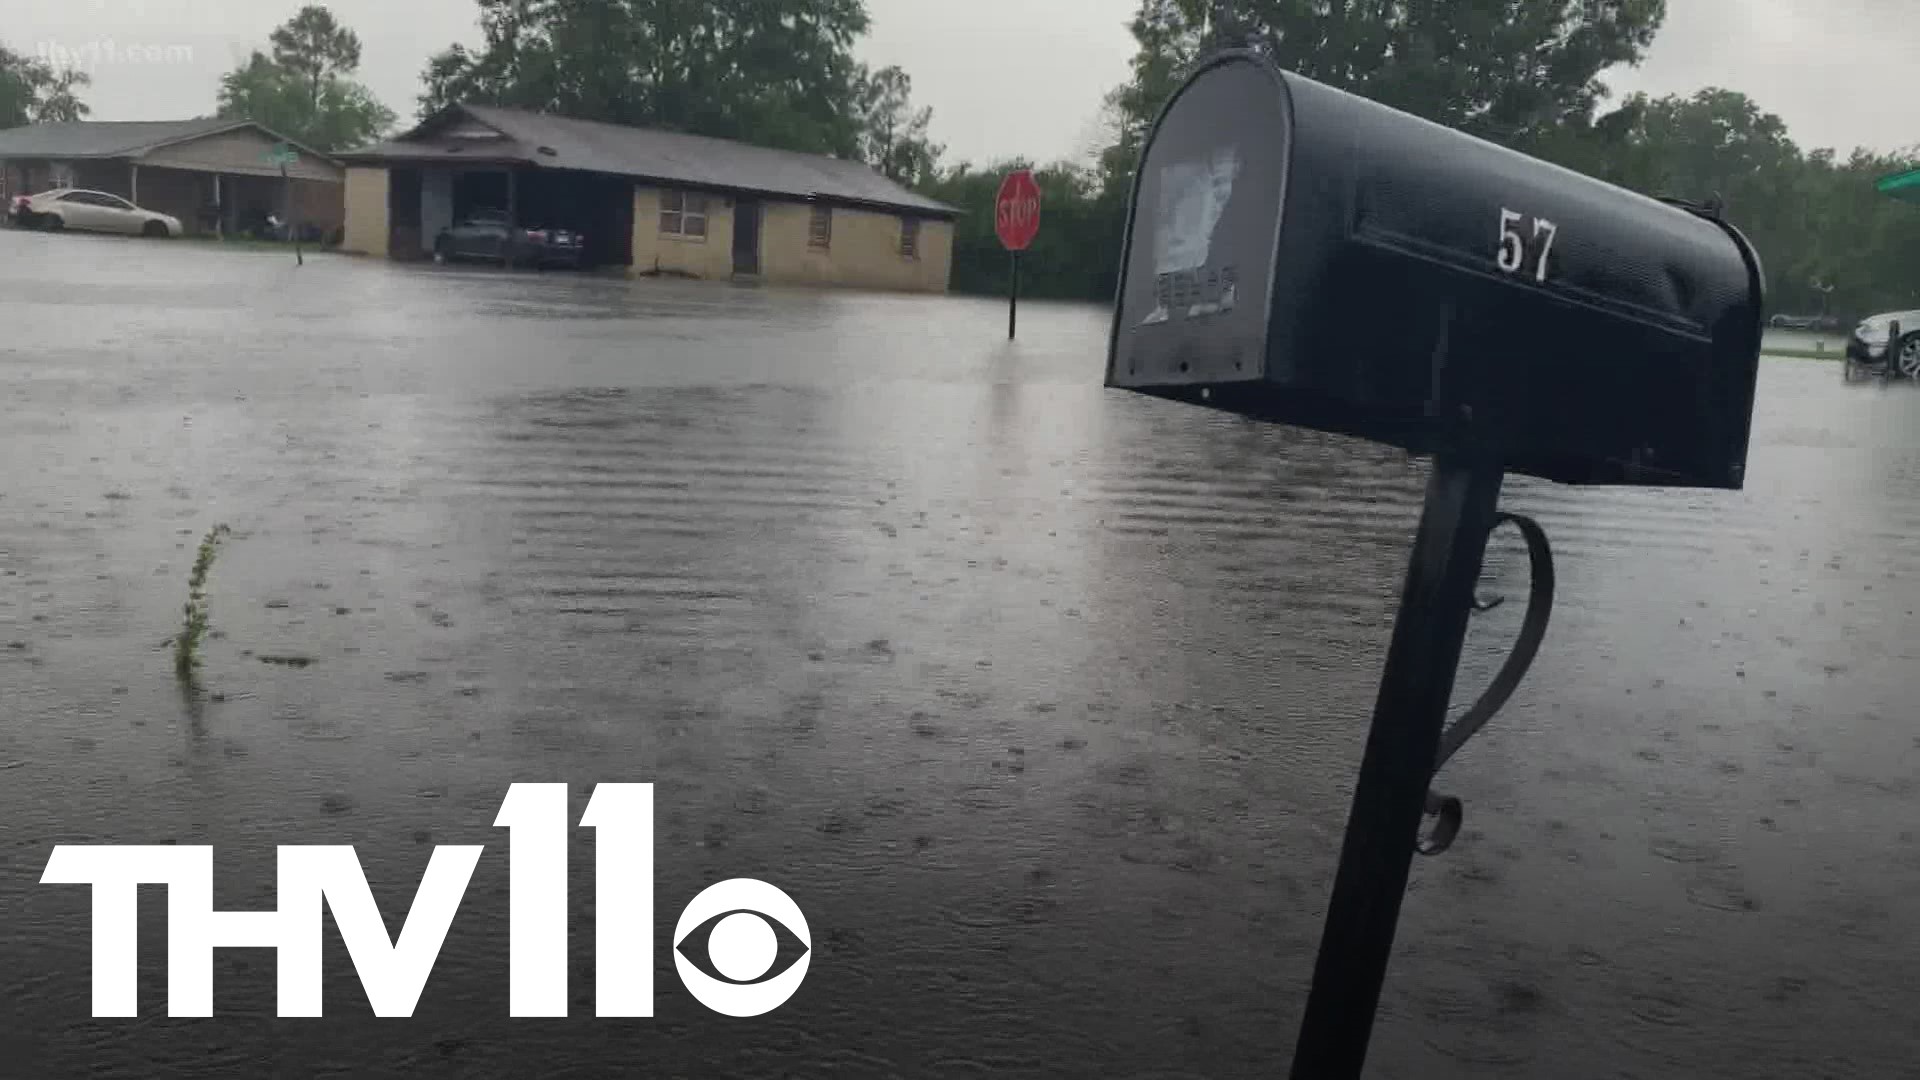 Water seeped into several homes in Dumas after the area suffered heavy rainfall and severe flooding. Many were forced to leave their homes and reside elsewhere